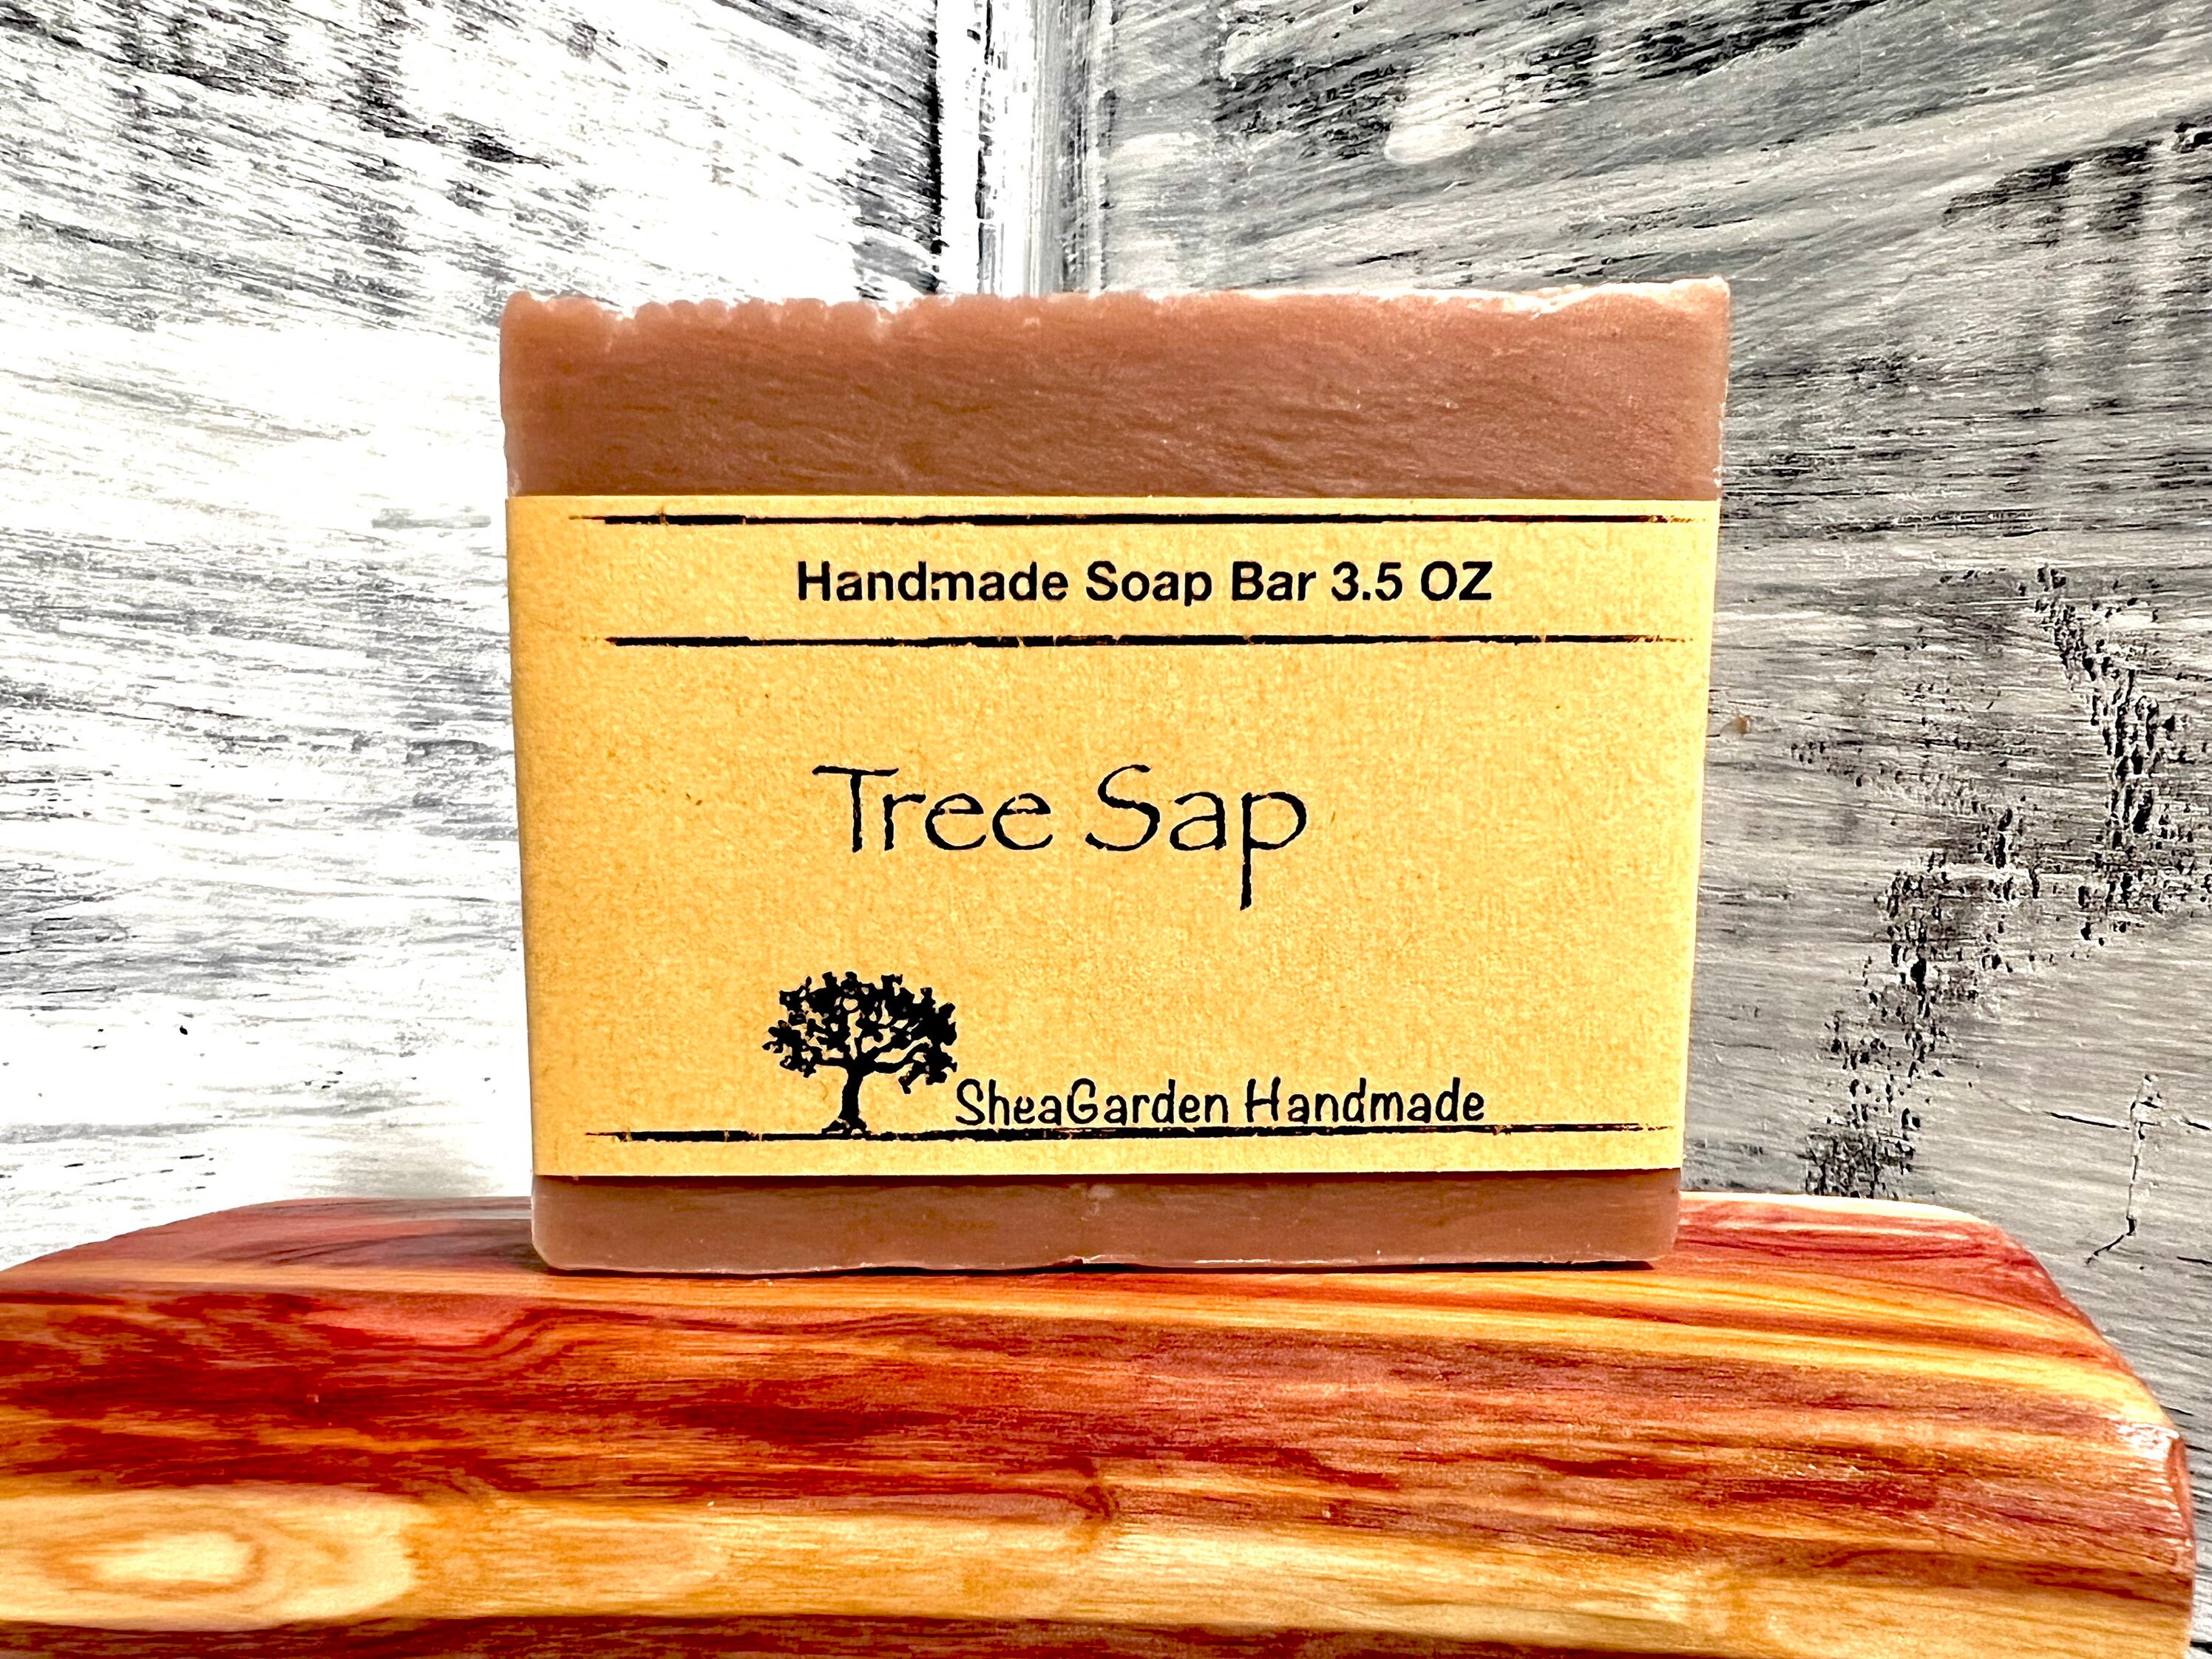 SVG Volcanic Rock (pumice) Soap – All Natural Handmade Soaps and